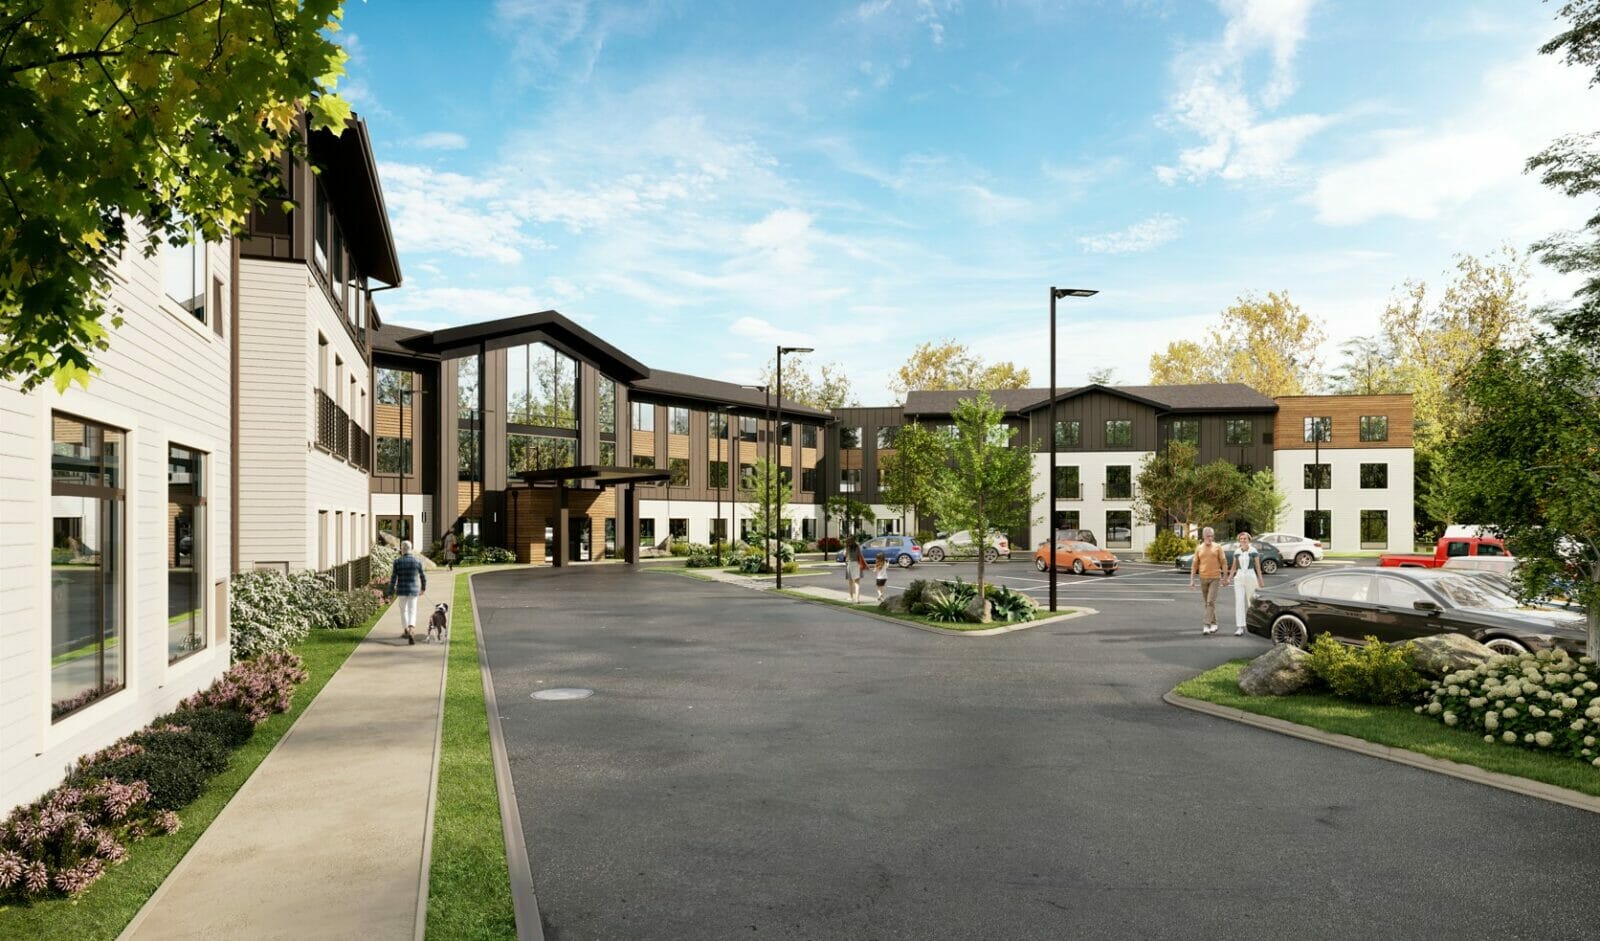 The Gallery at Spokane Exterior Rendering Spokane Washington Independent Assisted Living and Memory Care. Walking paths and landscaped grounds.